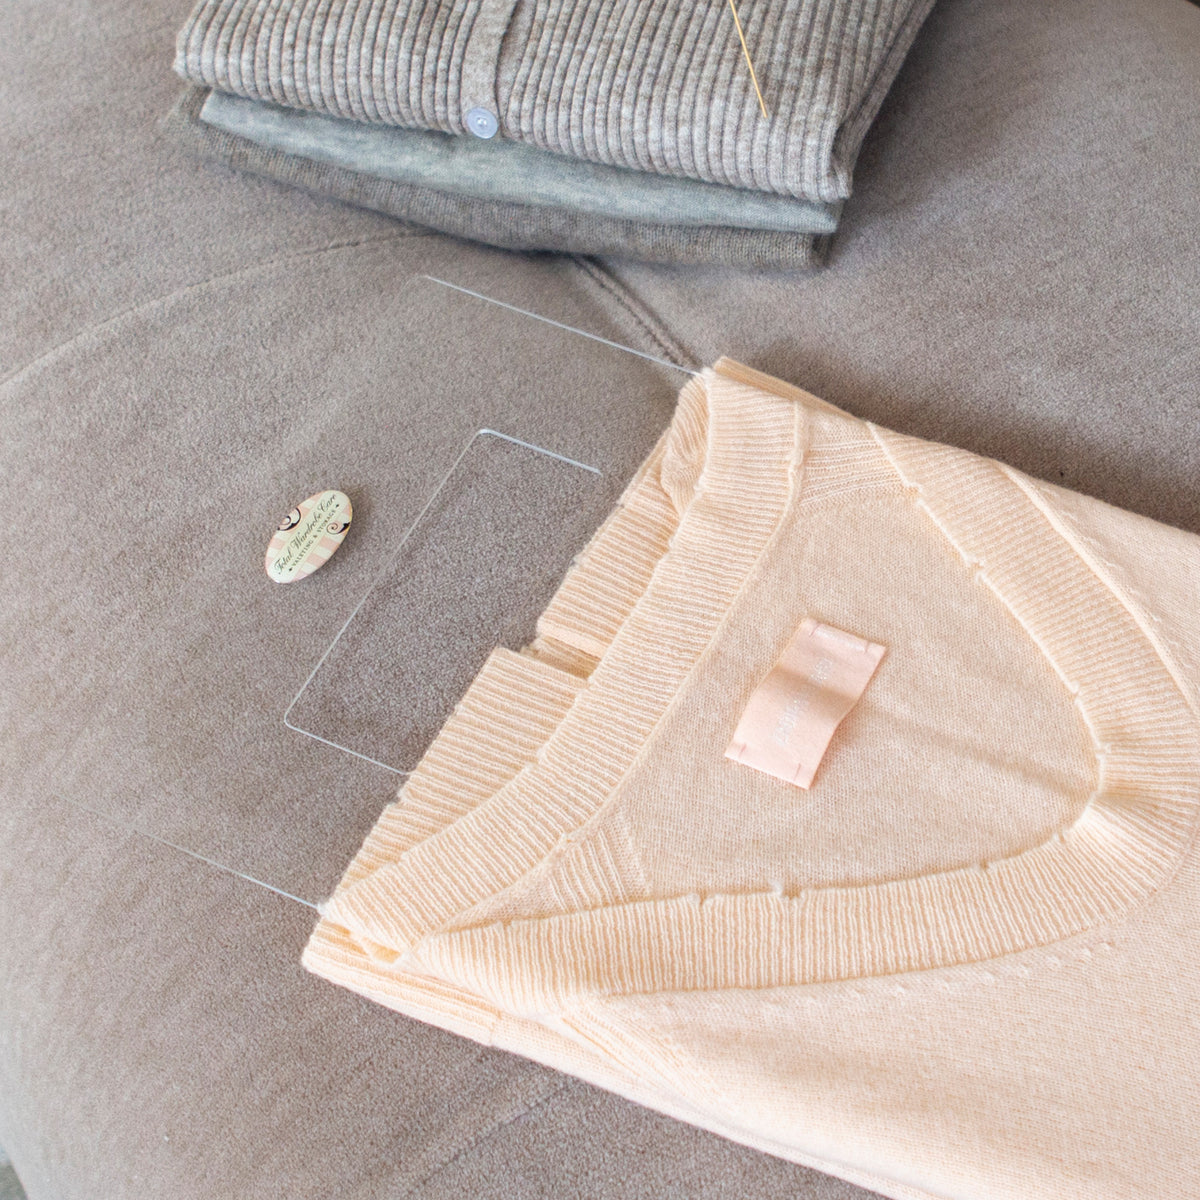 Peach cashmere jumper being folded using the Total Wardrobe Care folding palette beside stack of folded clothes